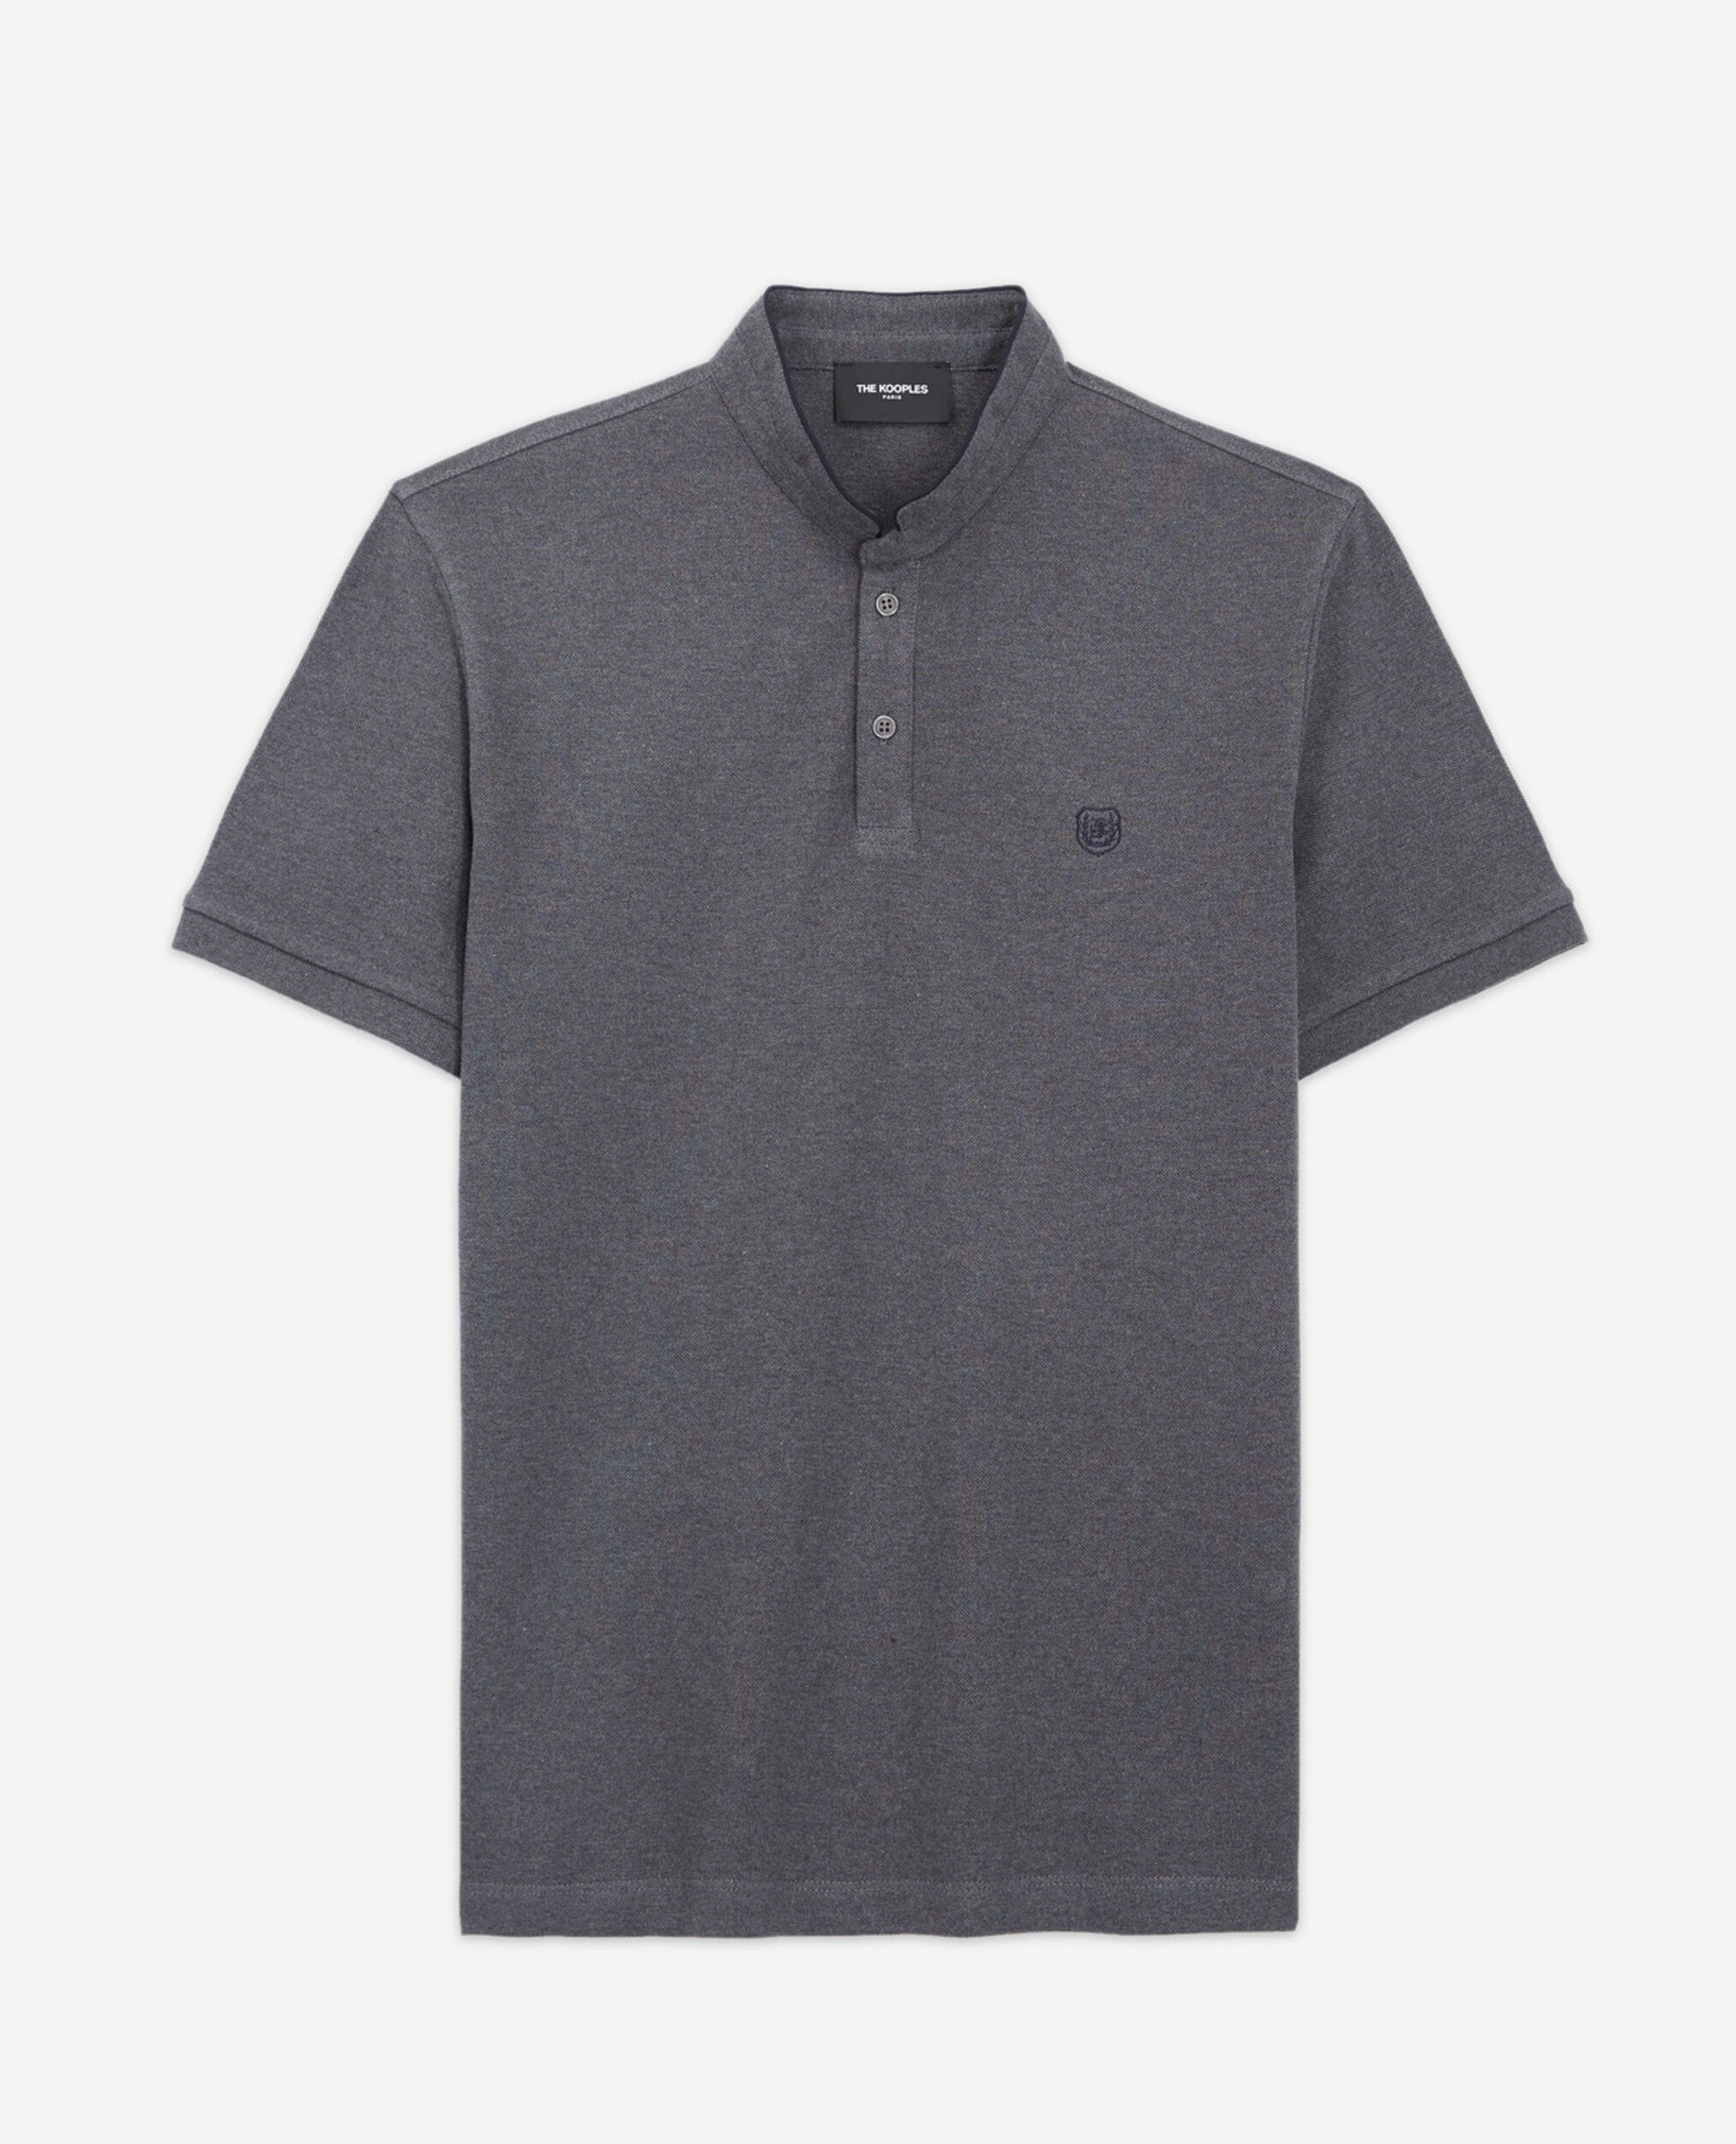 Dark gray embroidered polo w/ officer collar, GREY-NAVY, hi-res image number null